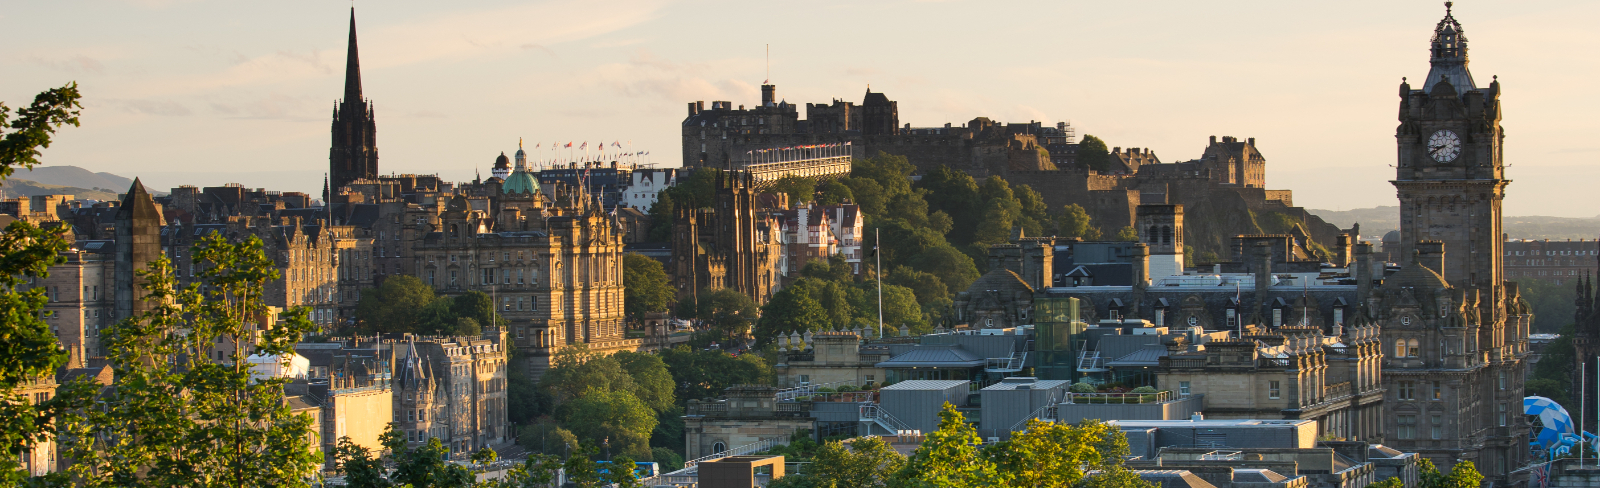 What is the most visited place in Edinburgh